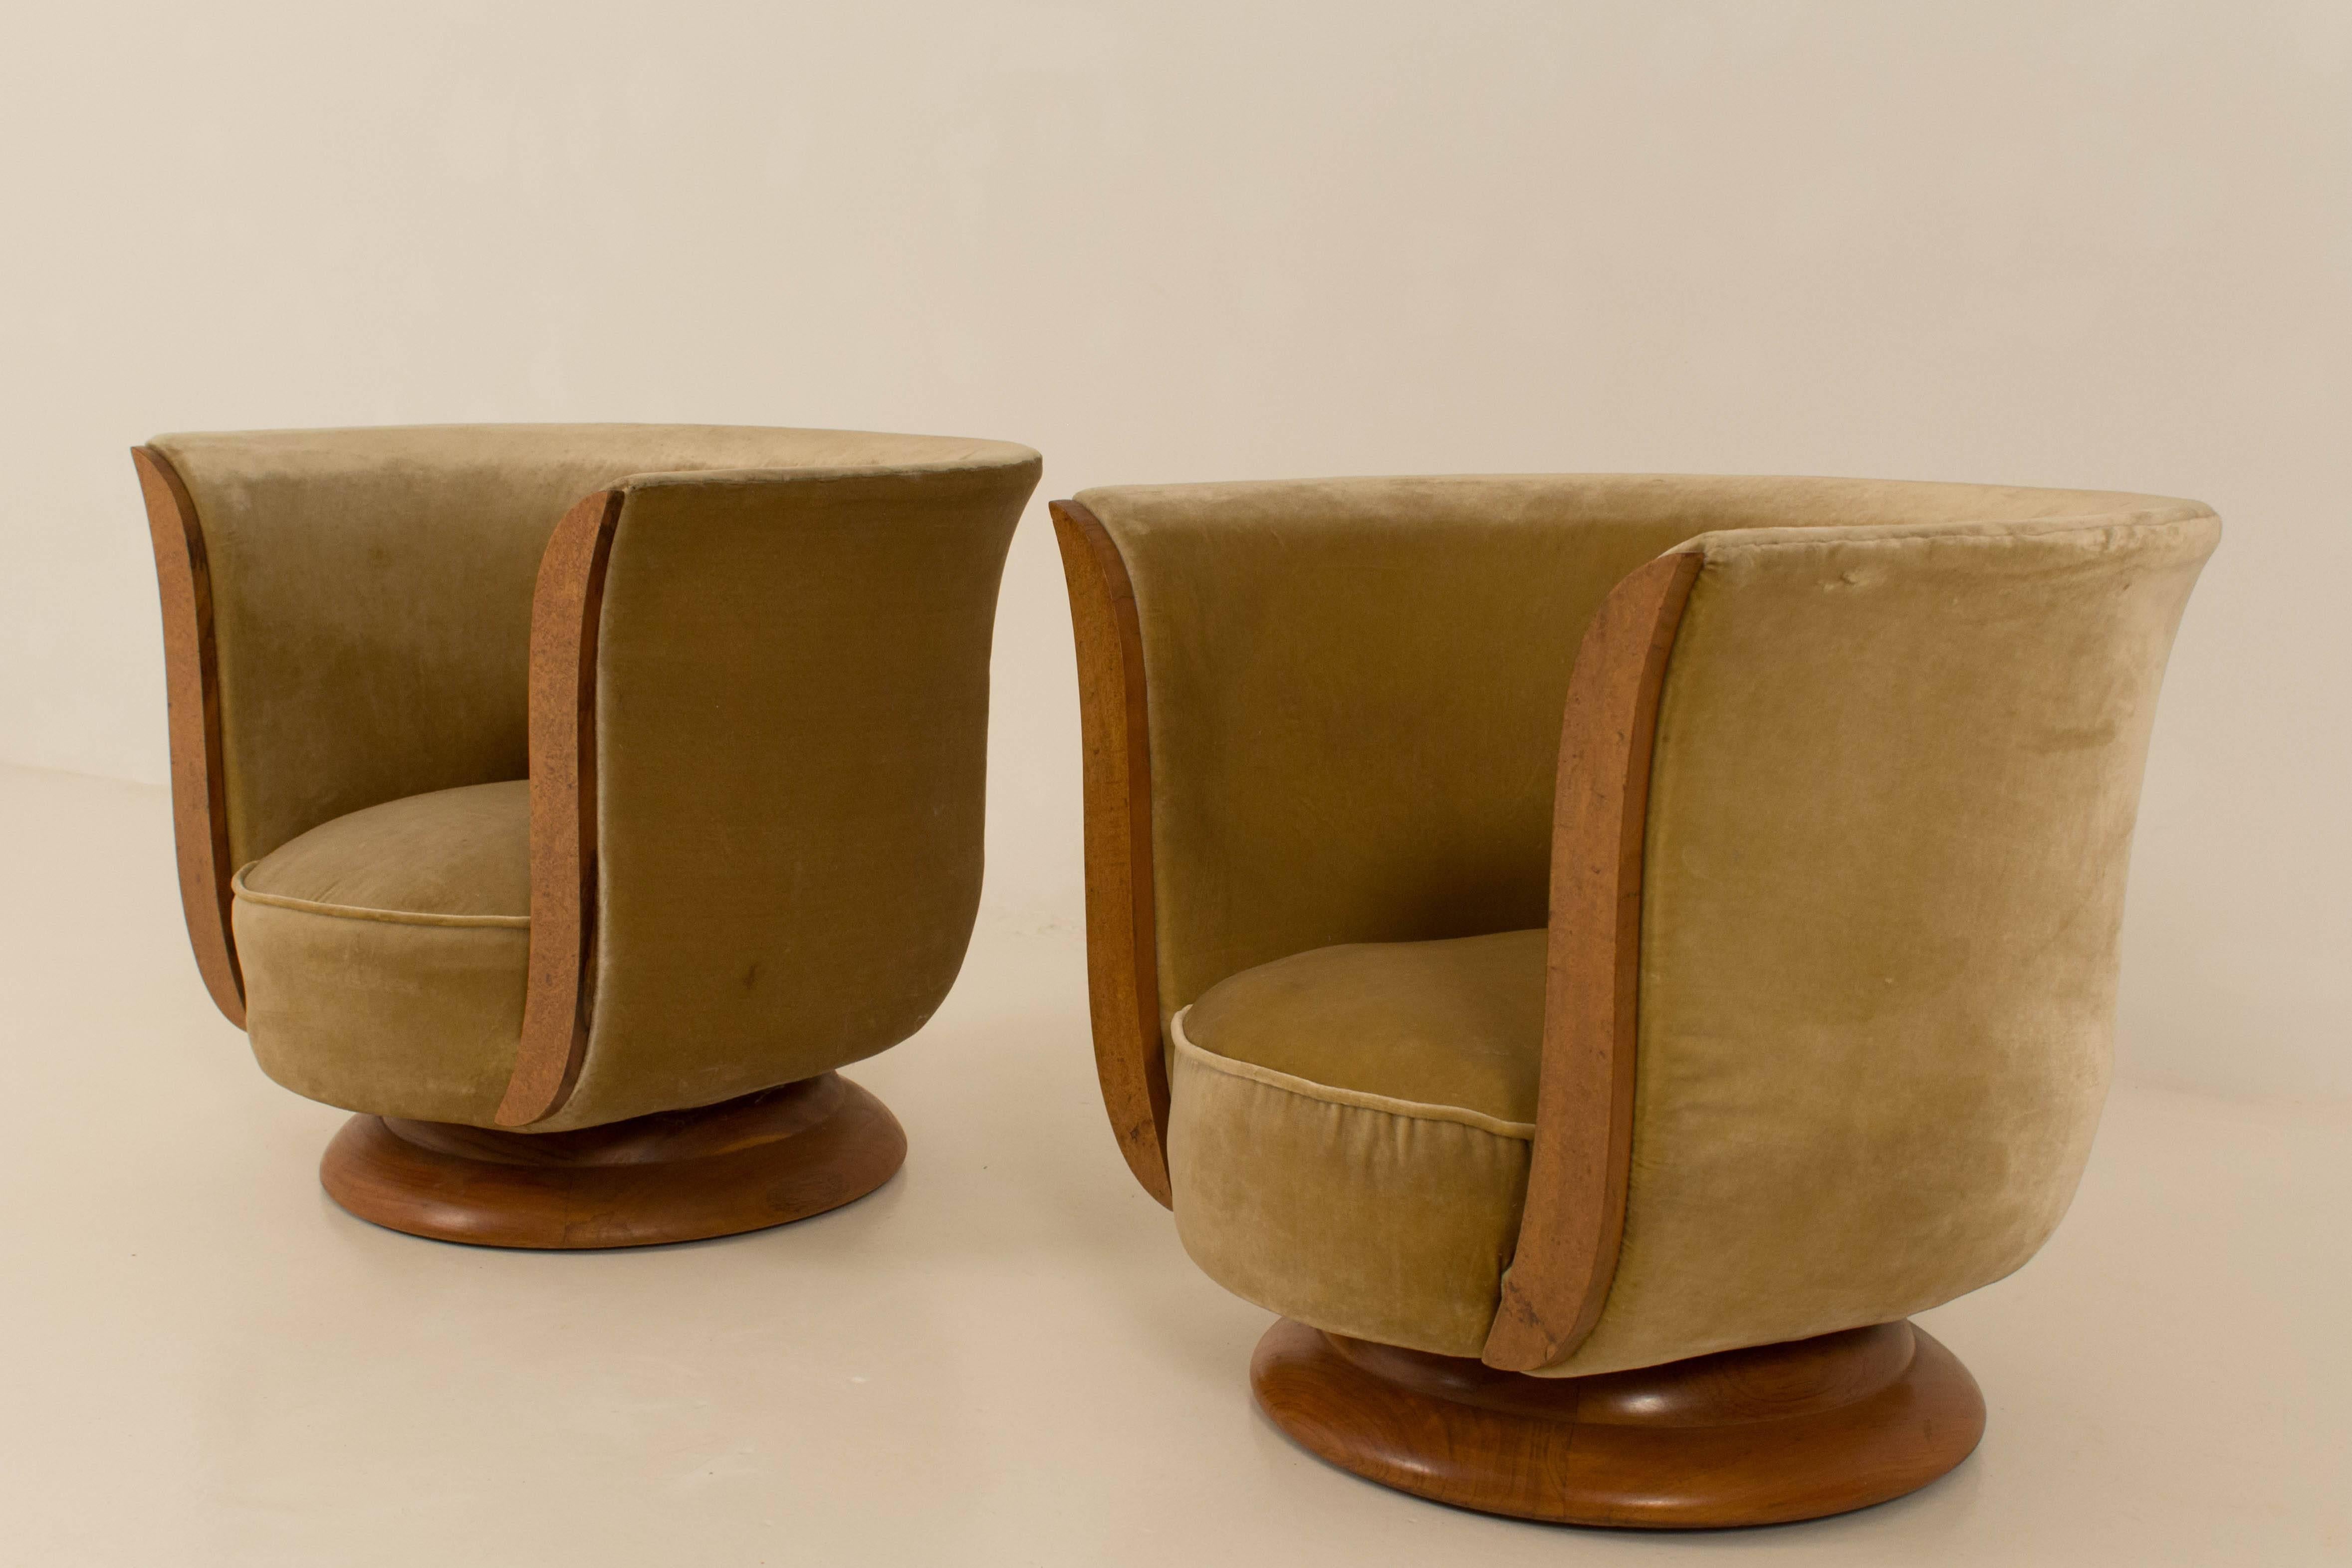 Stunning pair of Art Deco lounge chairs for Hotel Le Malandre 1930s.
Burl wood with velvet upholstery.
Special design for Hotel Le Malandre Belgium.
Marked with metal tag.
In good original condition.